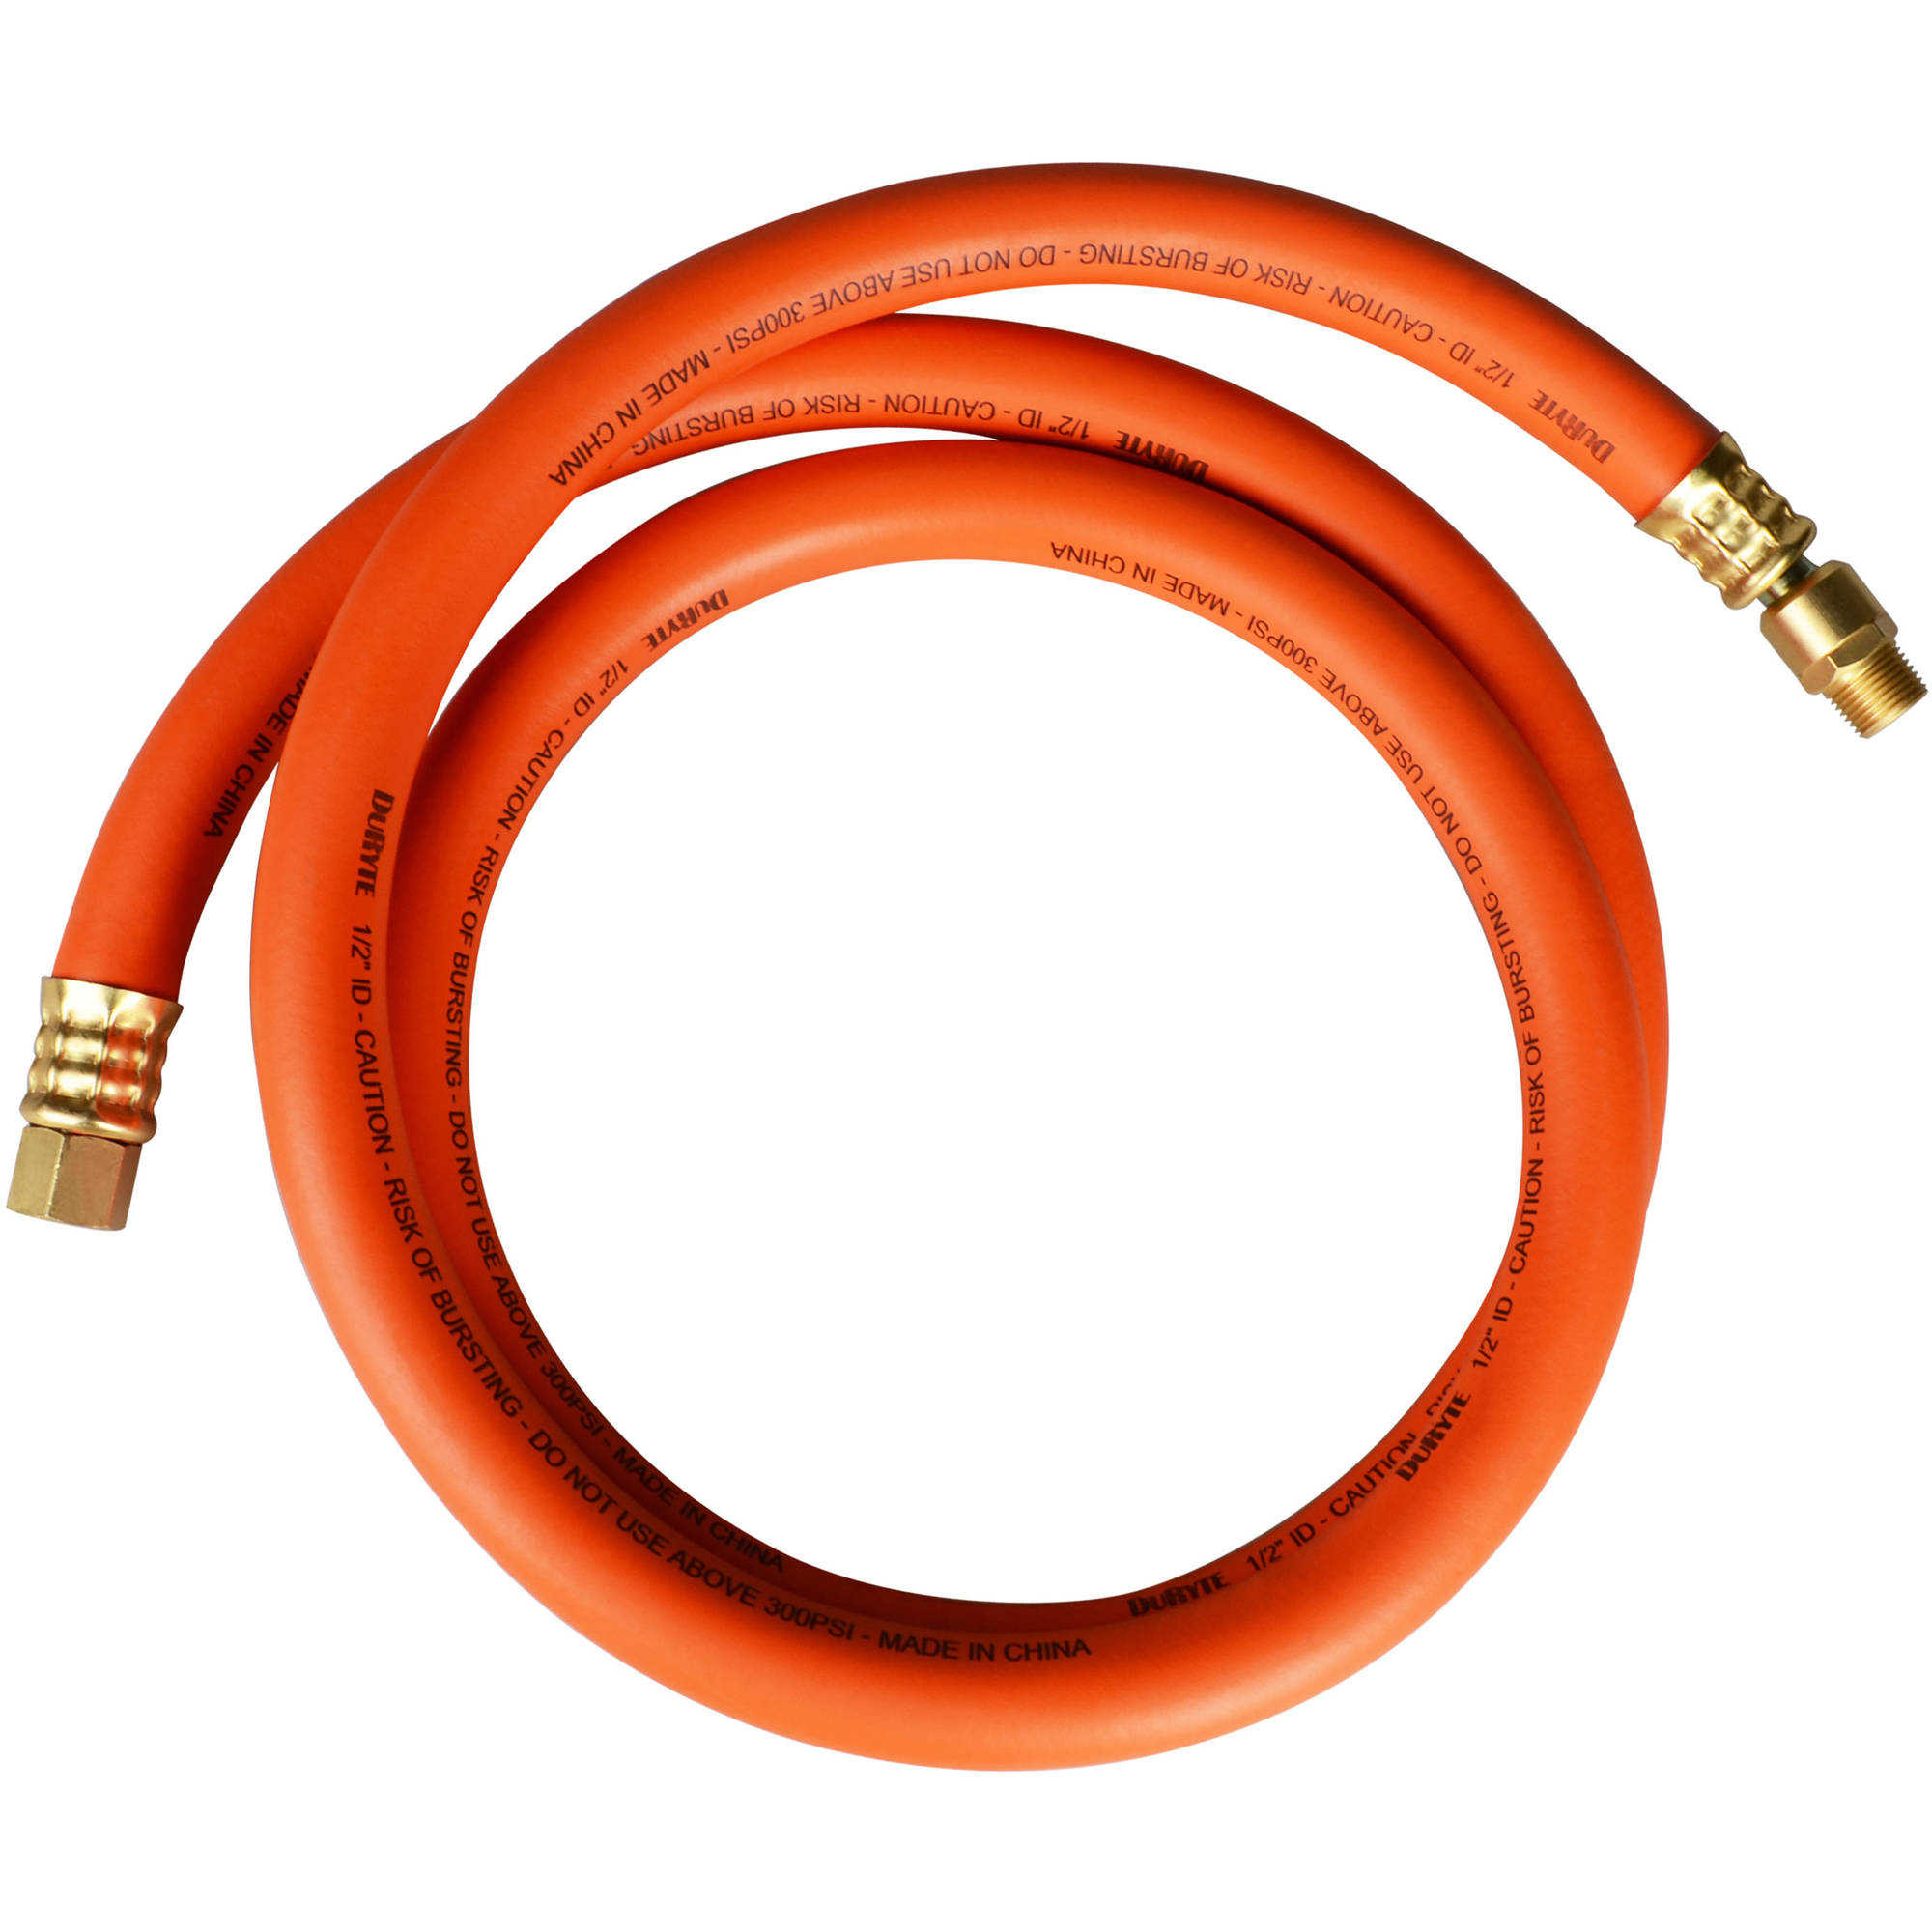 DuRyte 800008 Pro 300 PSI Rubber Lead-In Air Hose, 1/2' by 6', 3/8' MNPT Ball Swivel x 3/8' FNPT Brass Ends